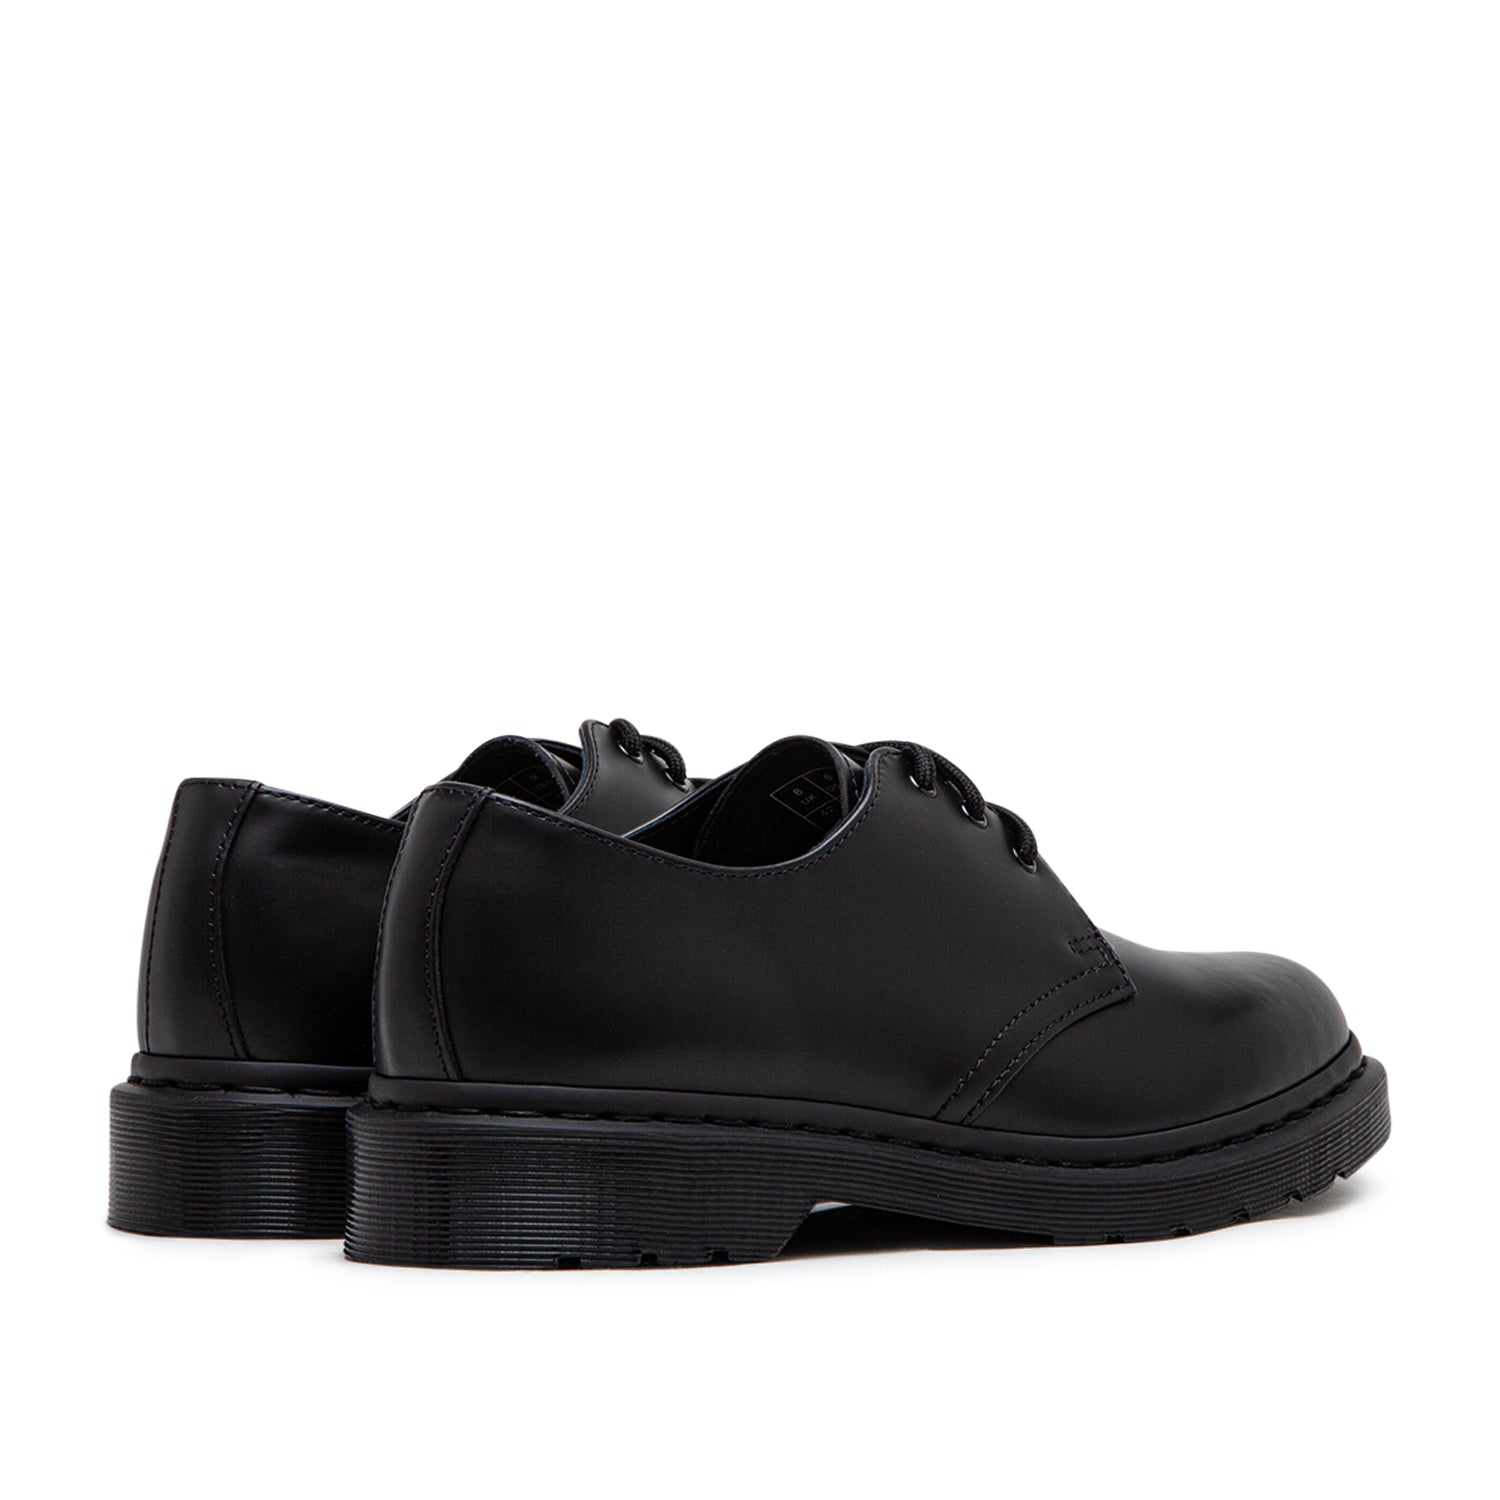 Dr. Martens 1461 Mono Smooth Leather Oxford Shoes (Schwarz)  - Allike Store